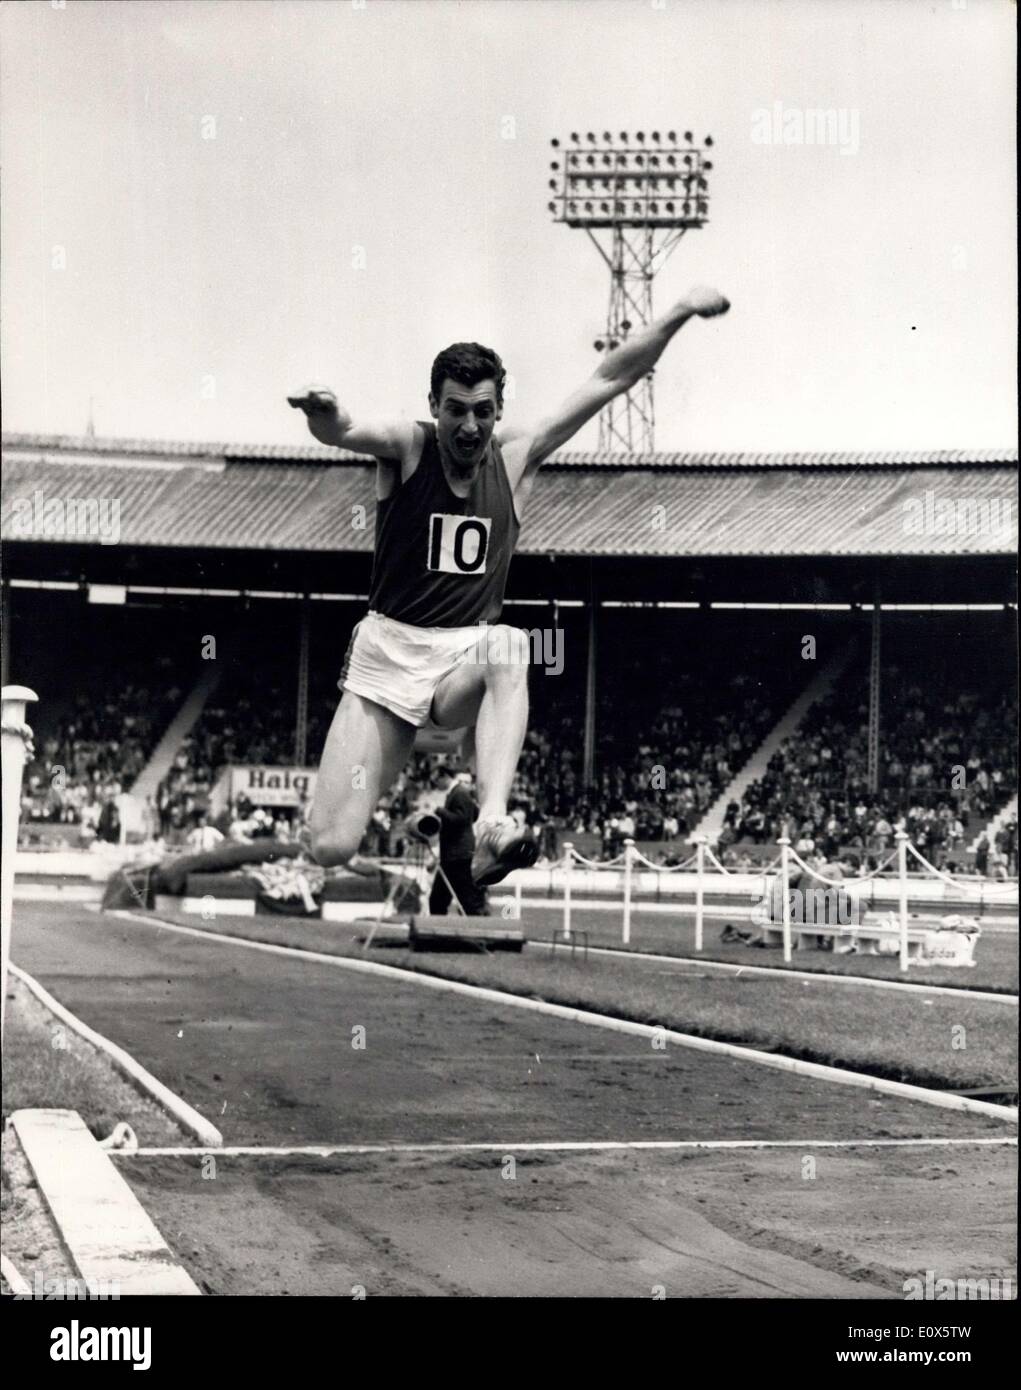 Jun. 07, 1965 - The British Games at the White City. Photo shows F. Alsop (Essex) in action as he makes a jump of 50ft. 10 3/4 in. in the Triple Jump event. Stock Photo